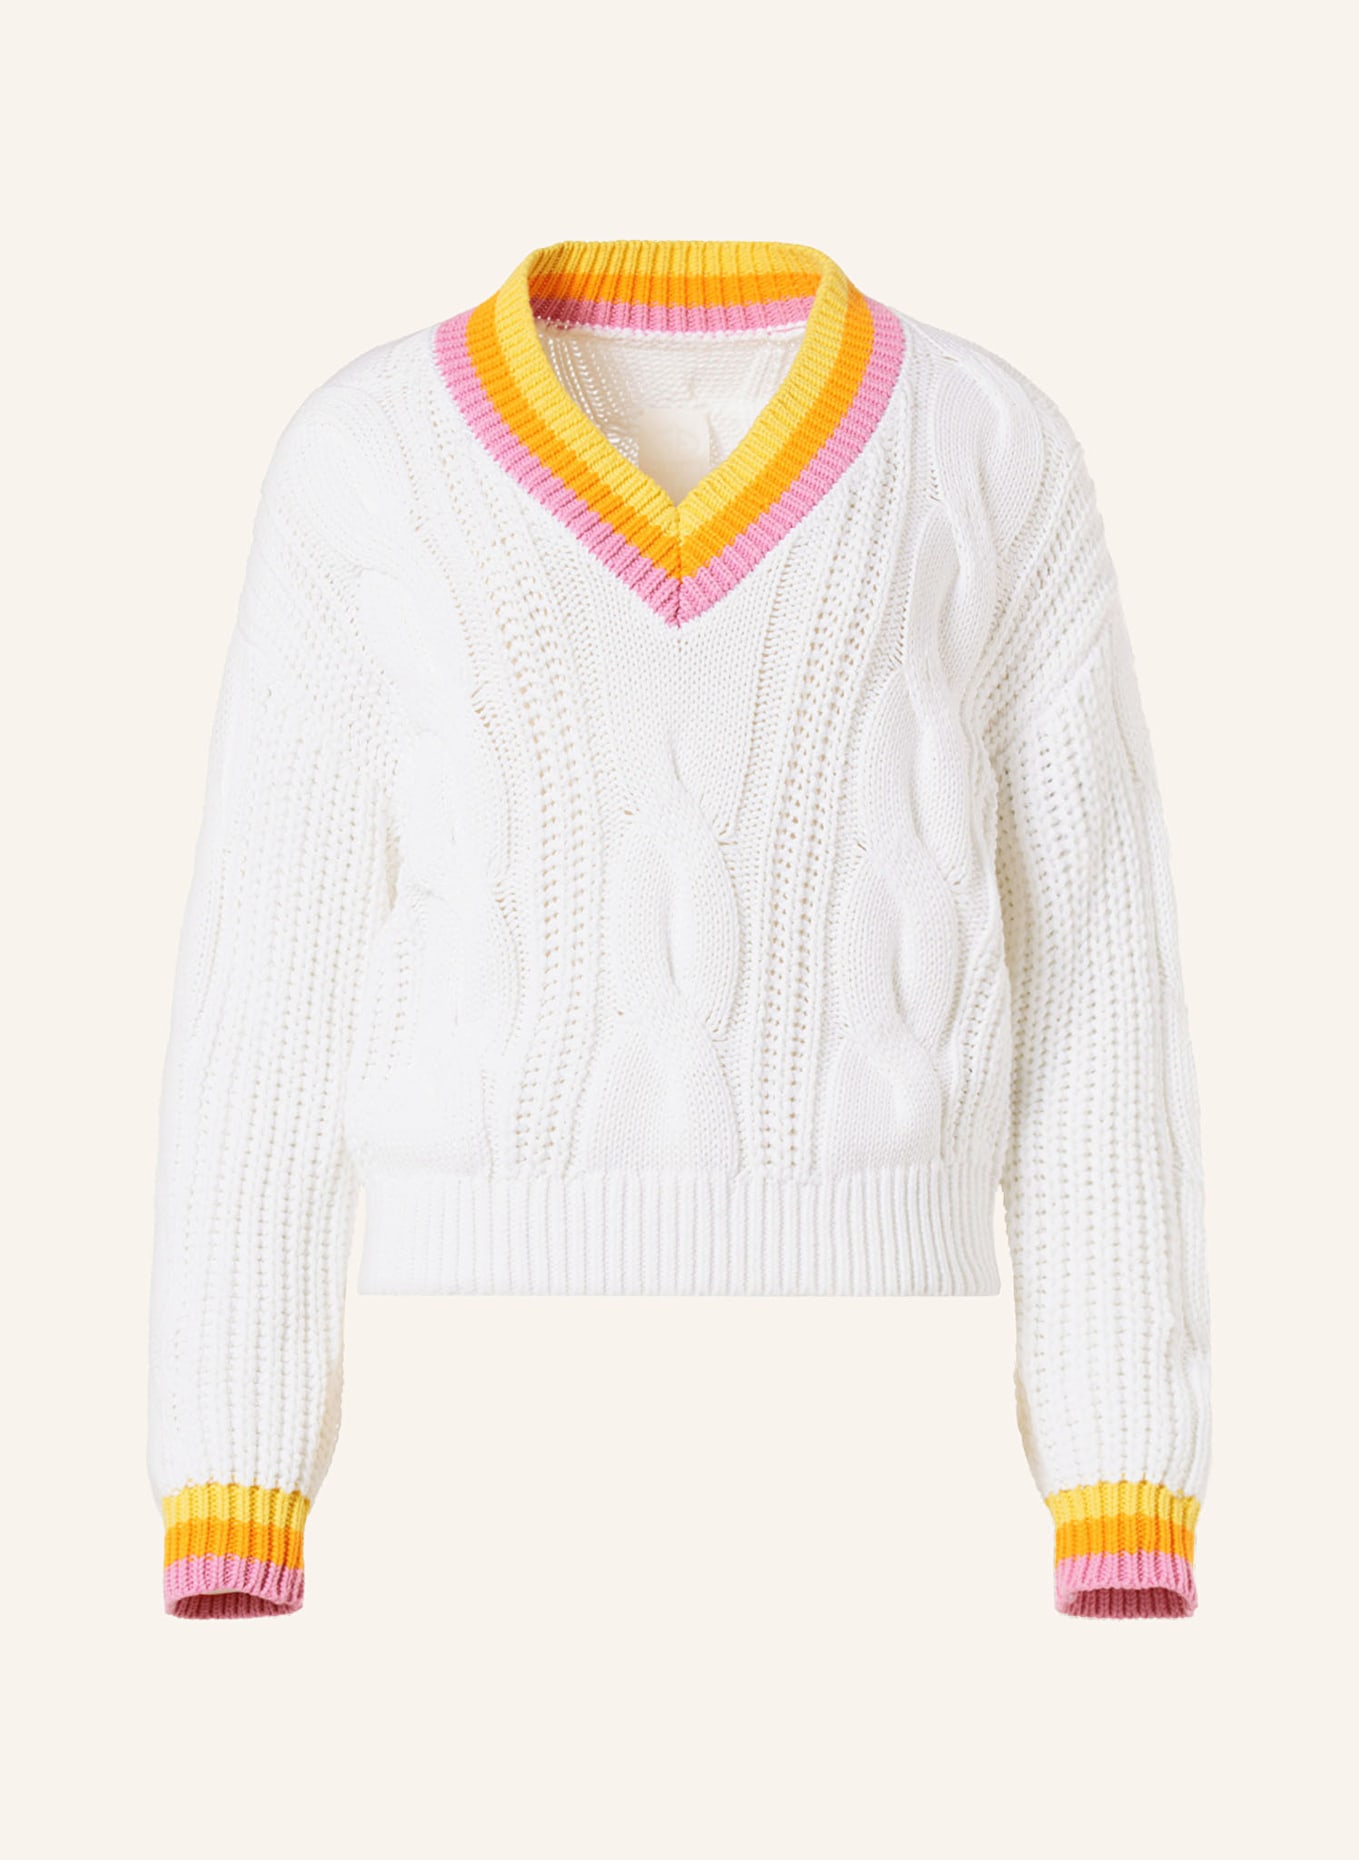 GOLDBERGH Pullover CABLE, Farbe: WEISS/ GELB/ PINK (Bild 1)